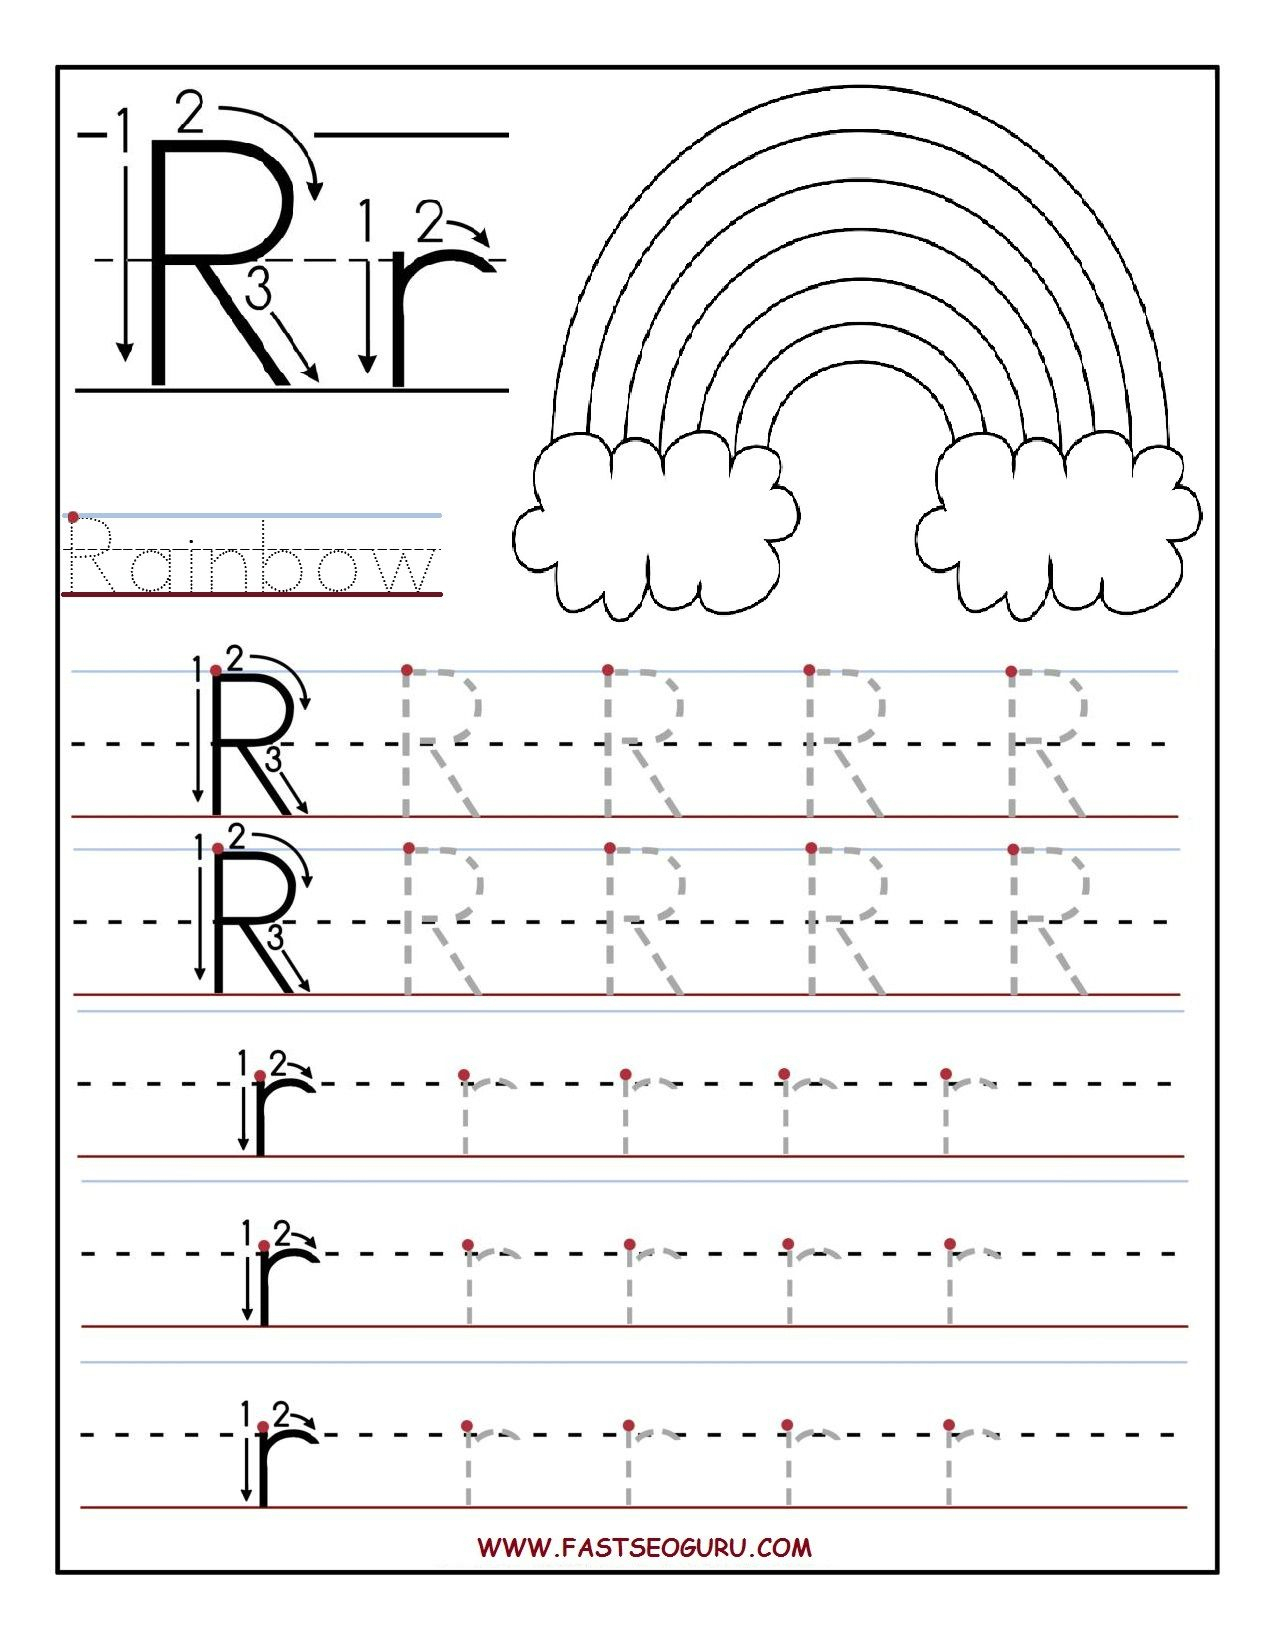 Printable Letter R Tracing Worksheets For Preschool | Teacher - Free | Free Printable Worksheets For Preschool Teachers